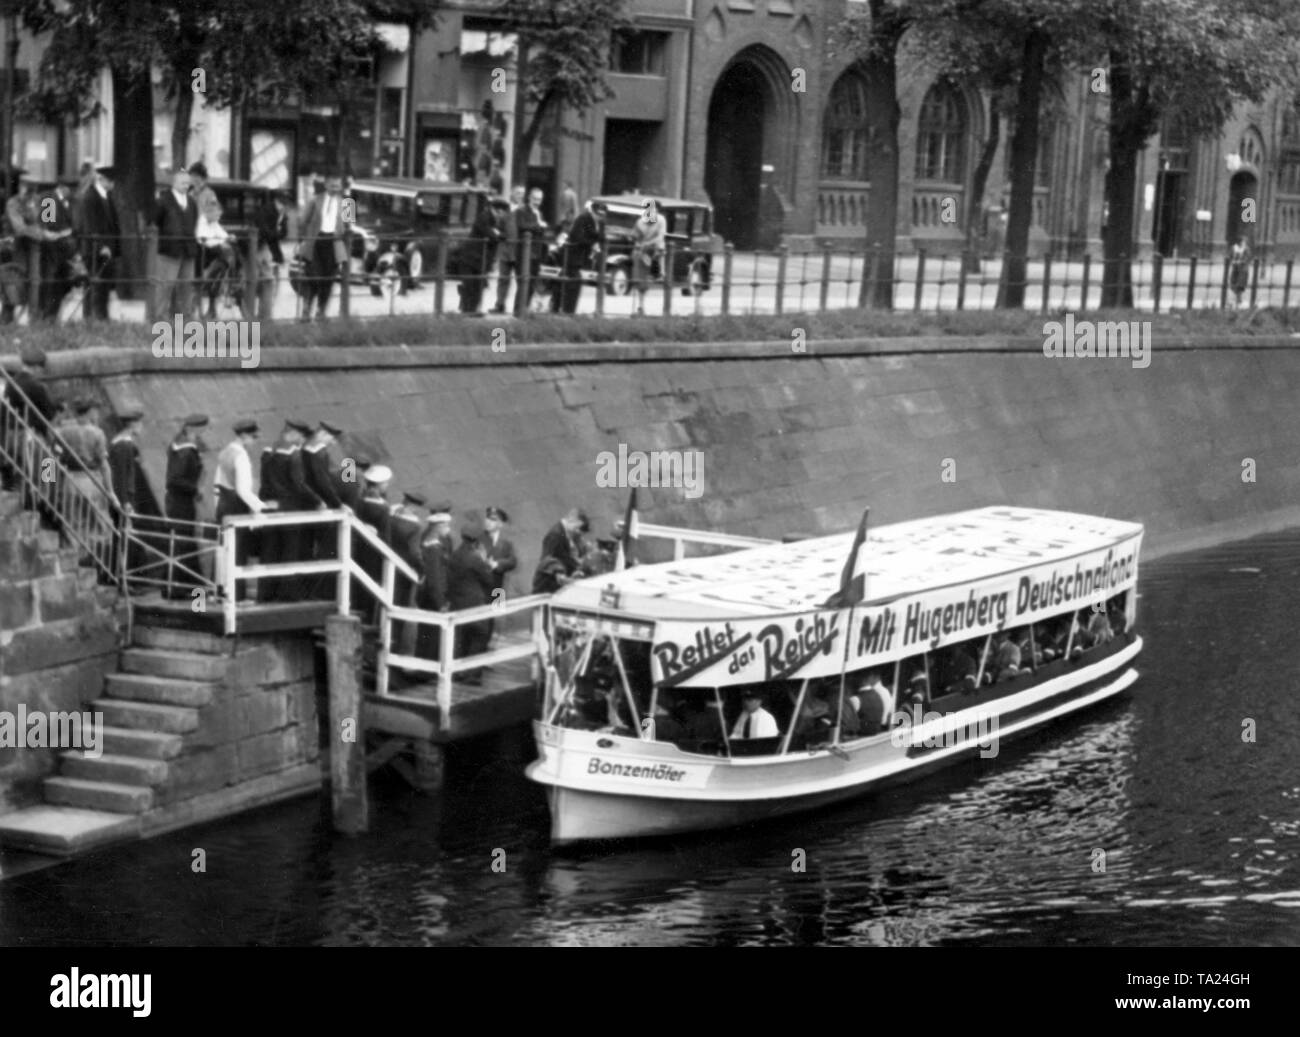 The Bismarck Youth organized an election propaganda trip on the Landwehrkanal on the occasion of the Reichstag elections. On the ship  there are election paroles to be read like 'Save the Reich!'and 'With Hugenberg German National!' Stock Photo